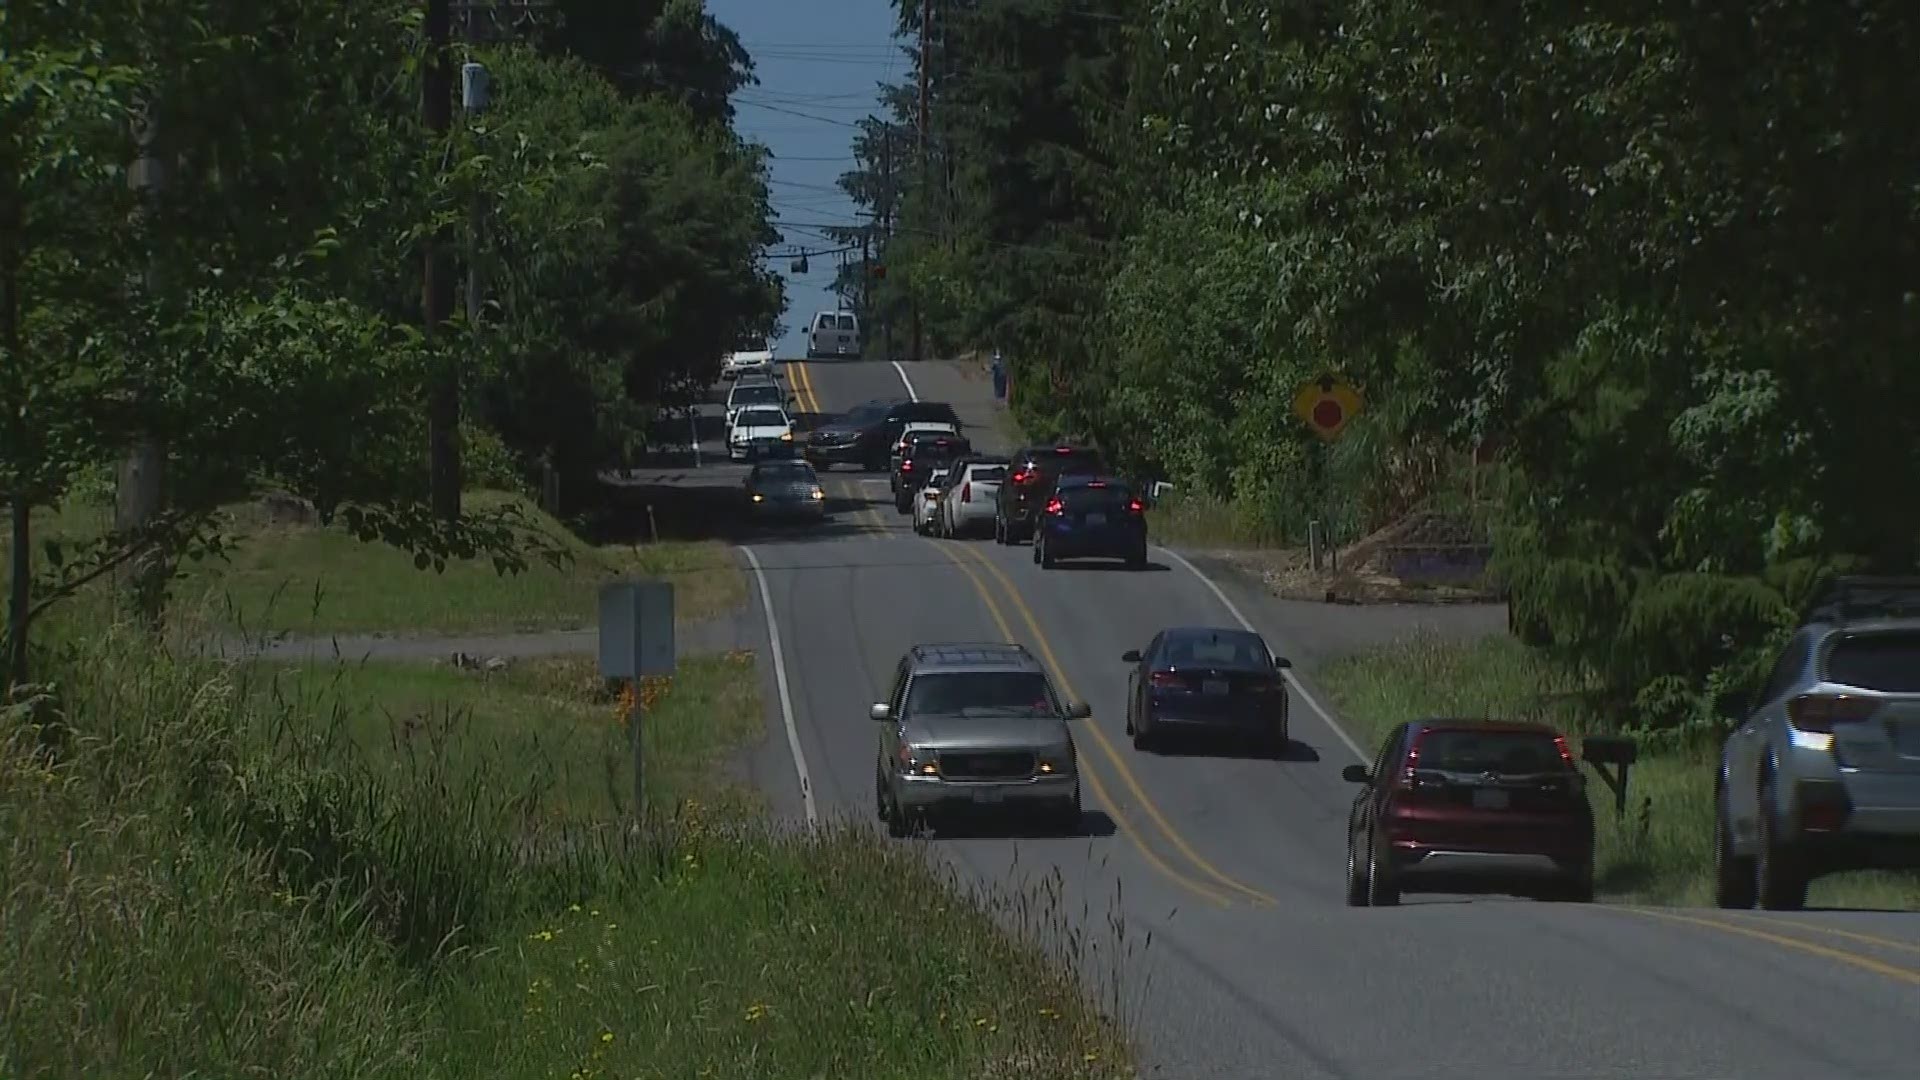 Two teens were killed and two teens were injured in a rollover crash near 31st Avenue Southwest and South Fruitland near Puyallup on June 26, 2020.